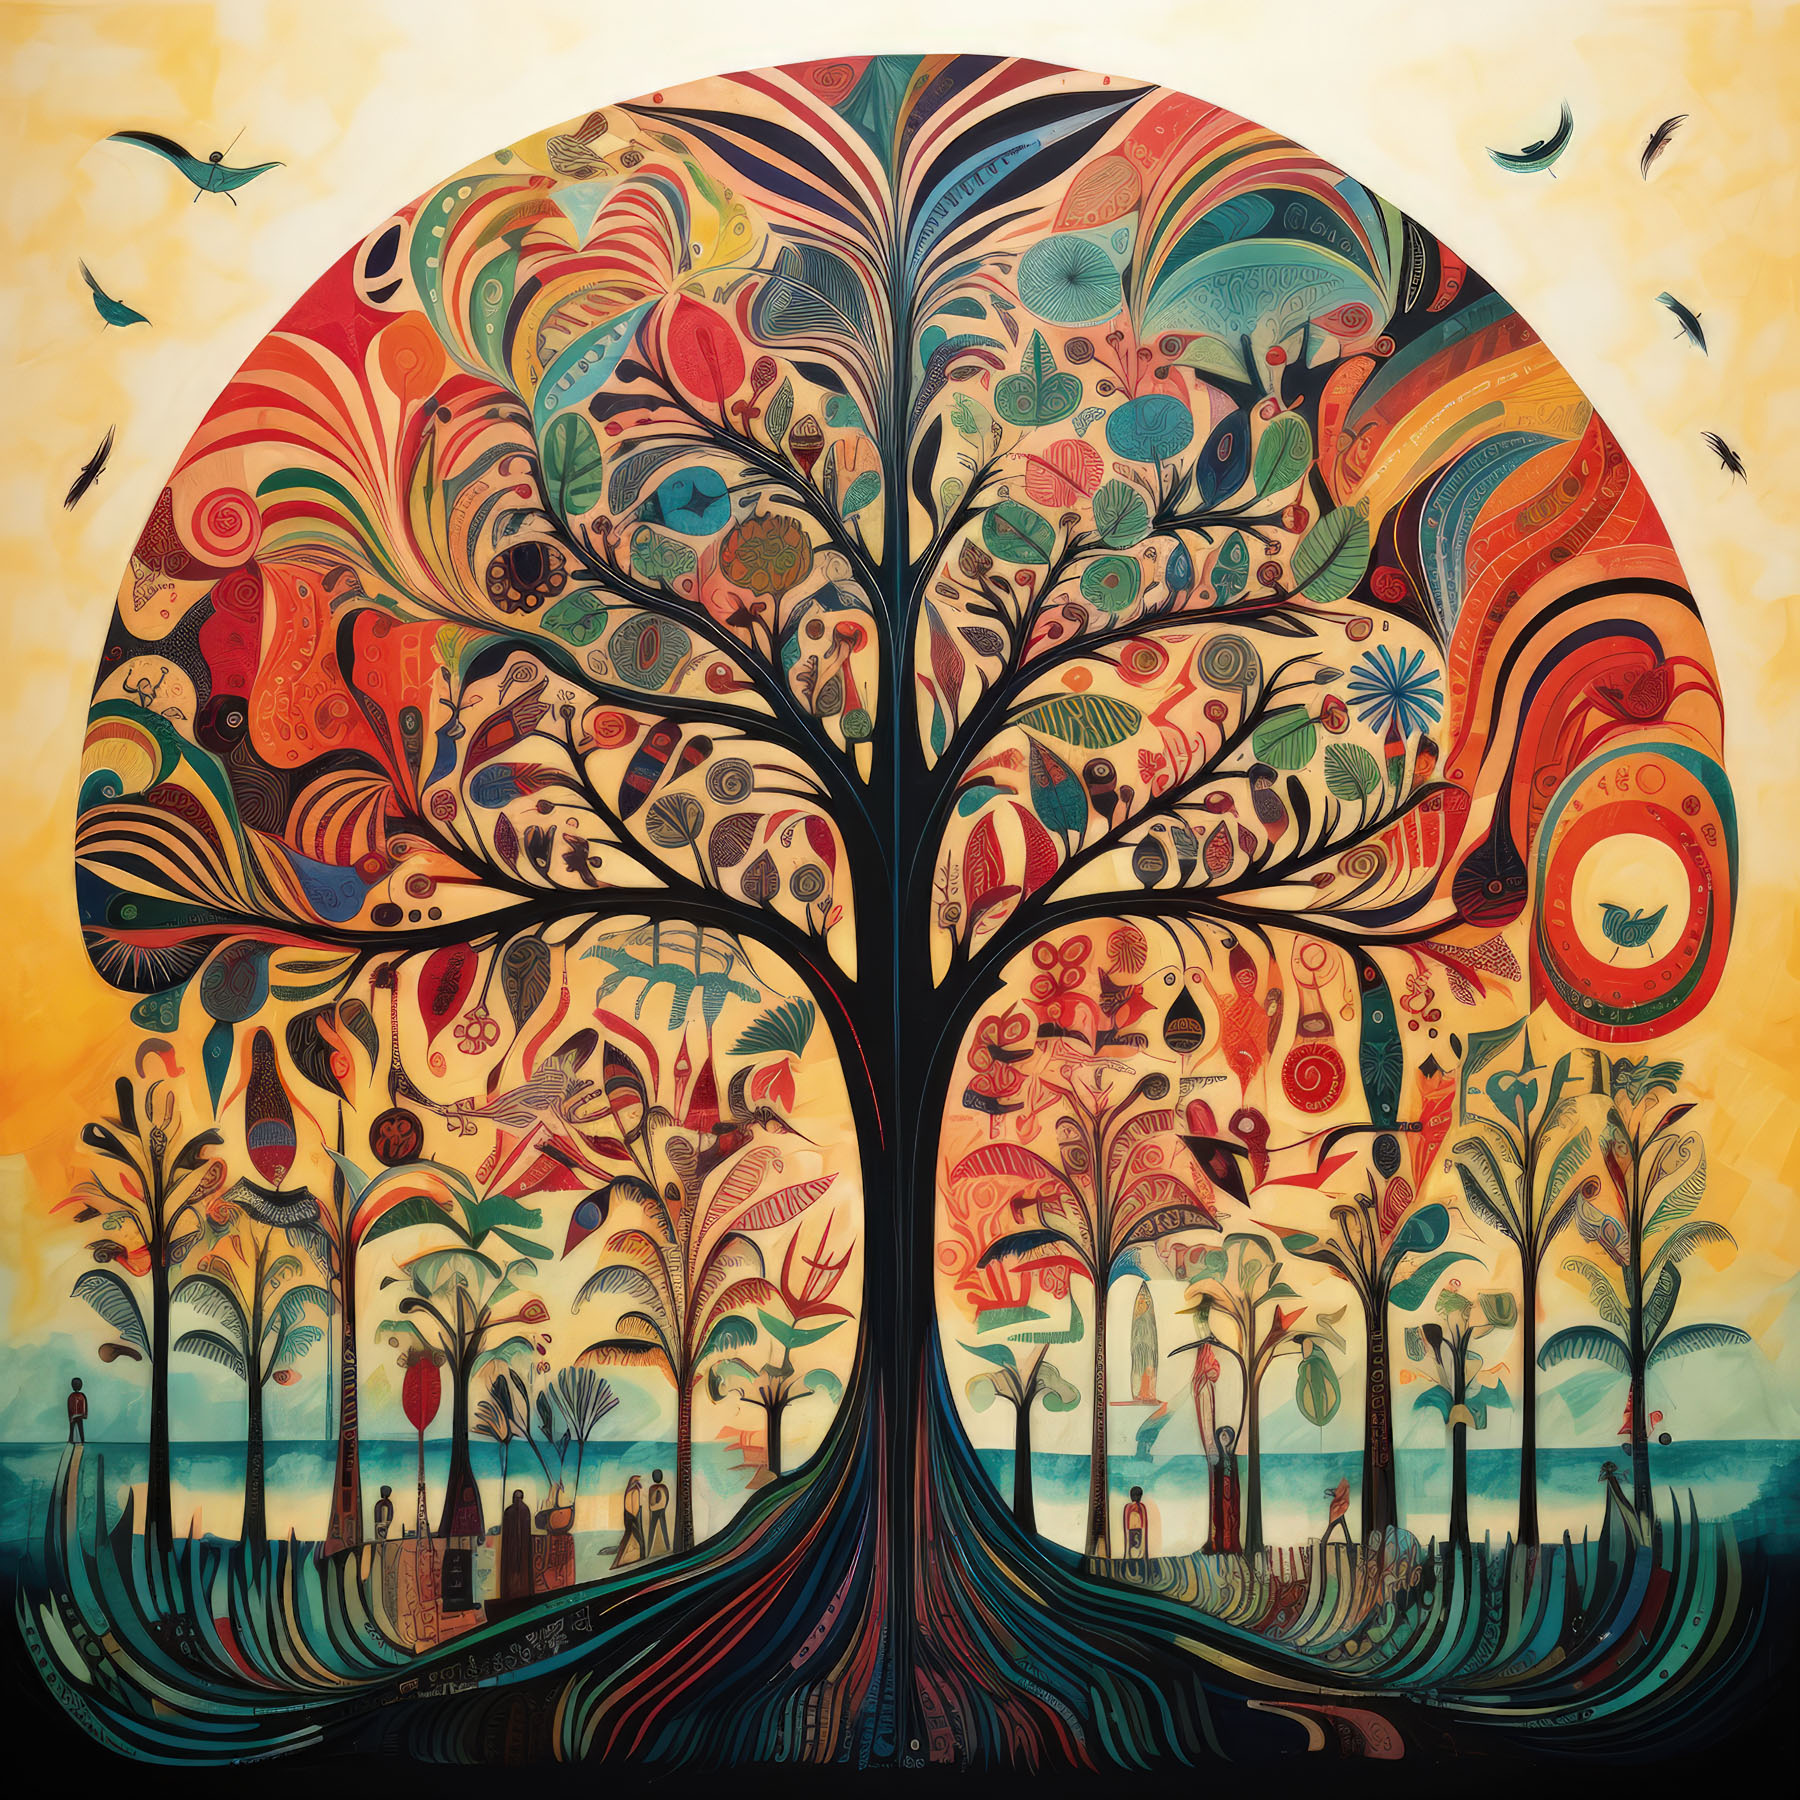 An abstract stylized tree made of patterns, shapes and motifs stands with it's colorful roots mirroring the canopy.